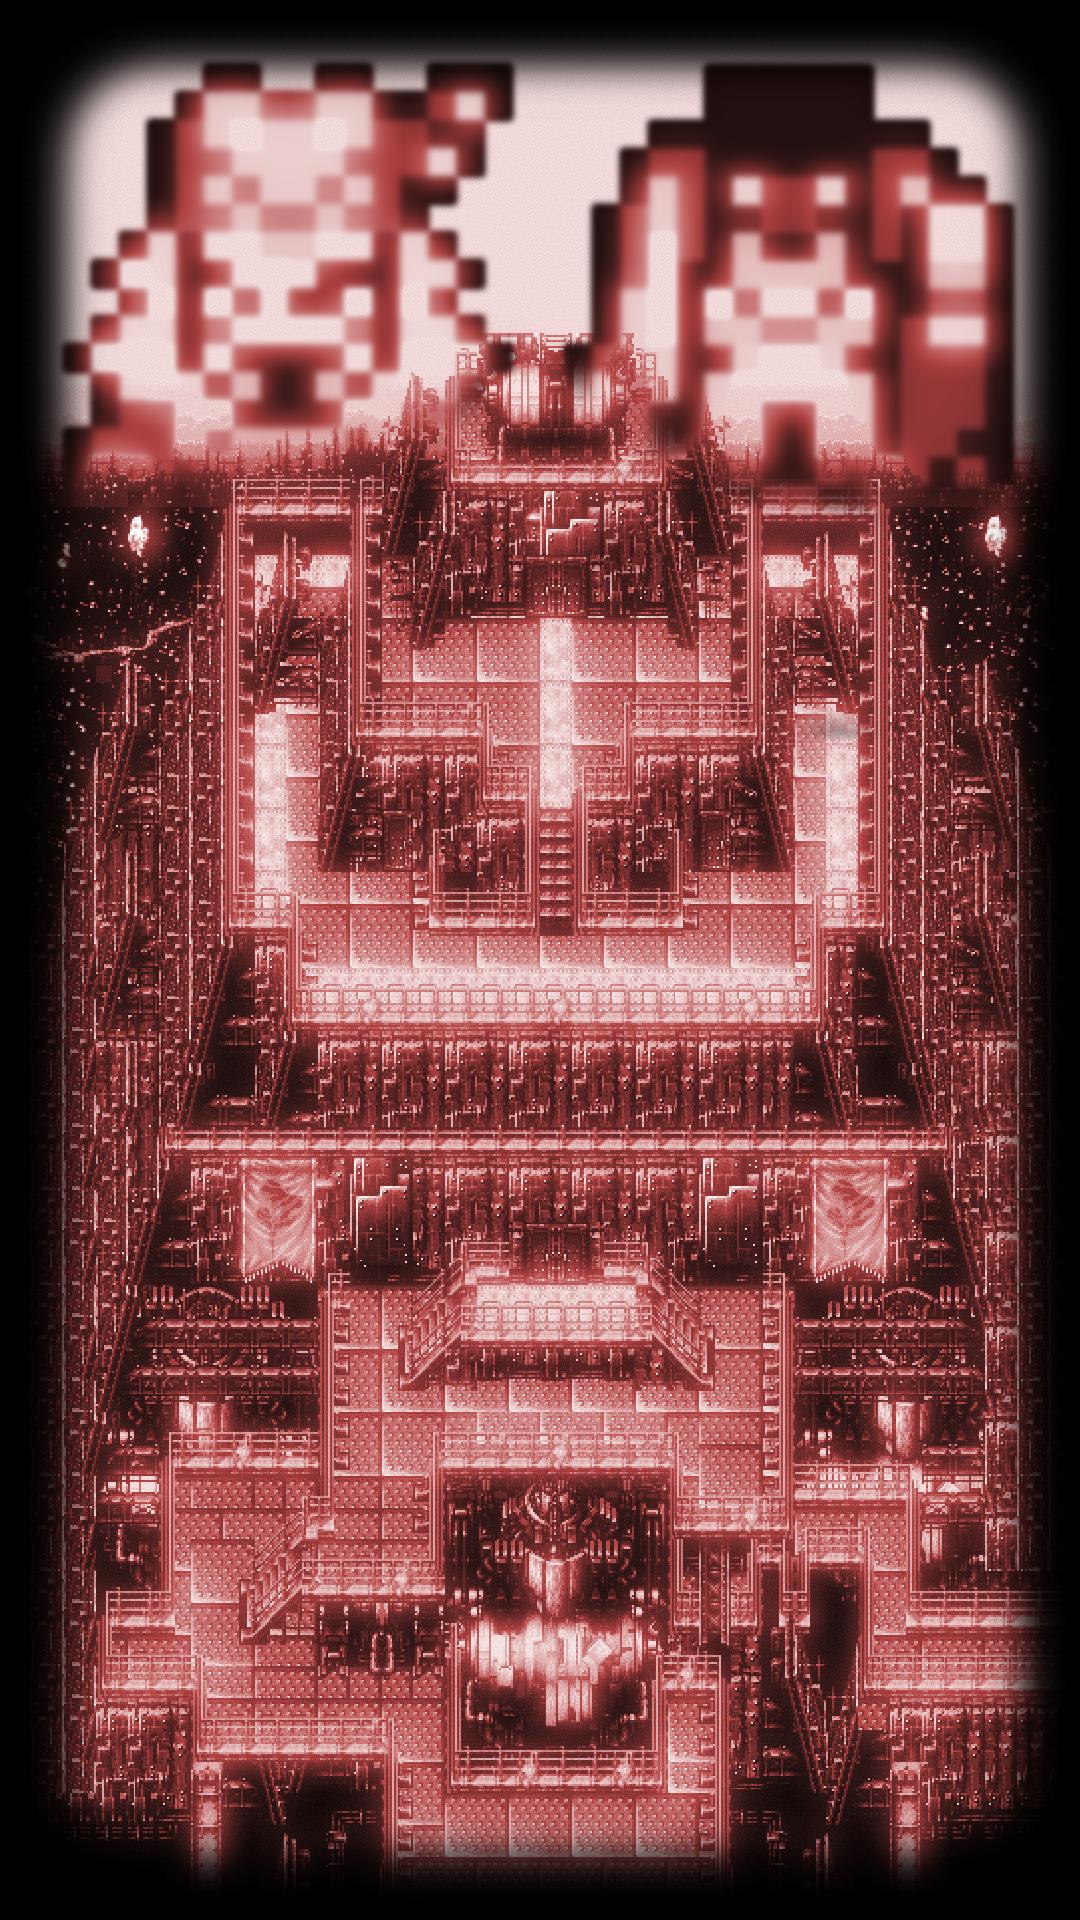 1080x1920 (vertical) wallpaper I made for my Galaxy S4 : Finalfantasy6